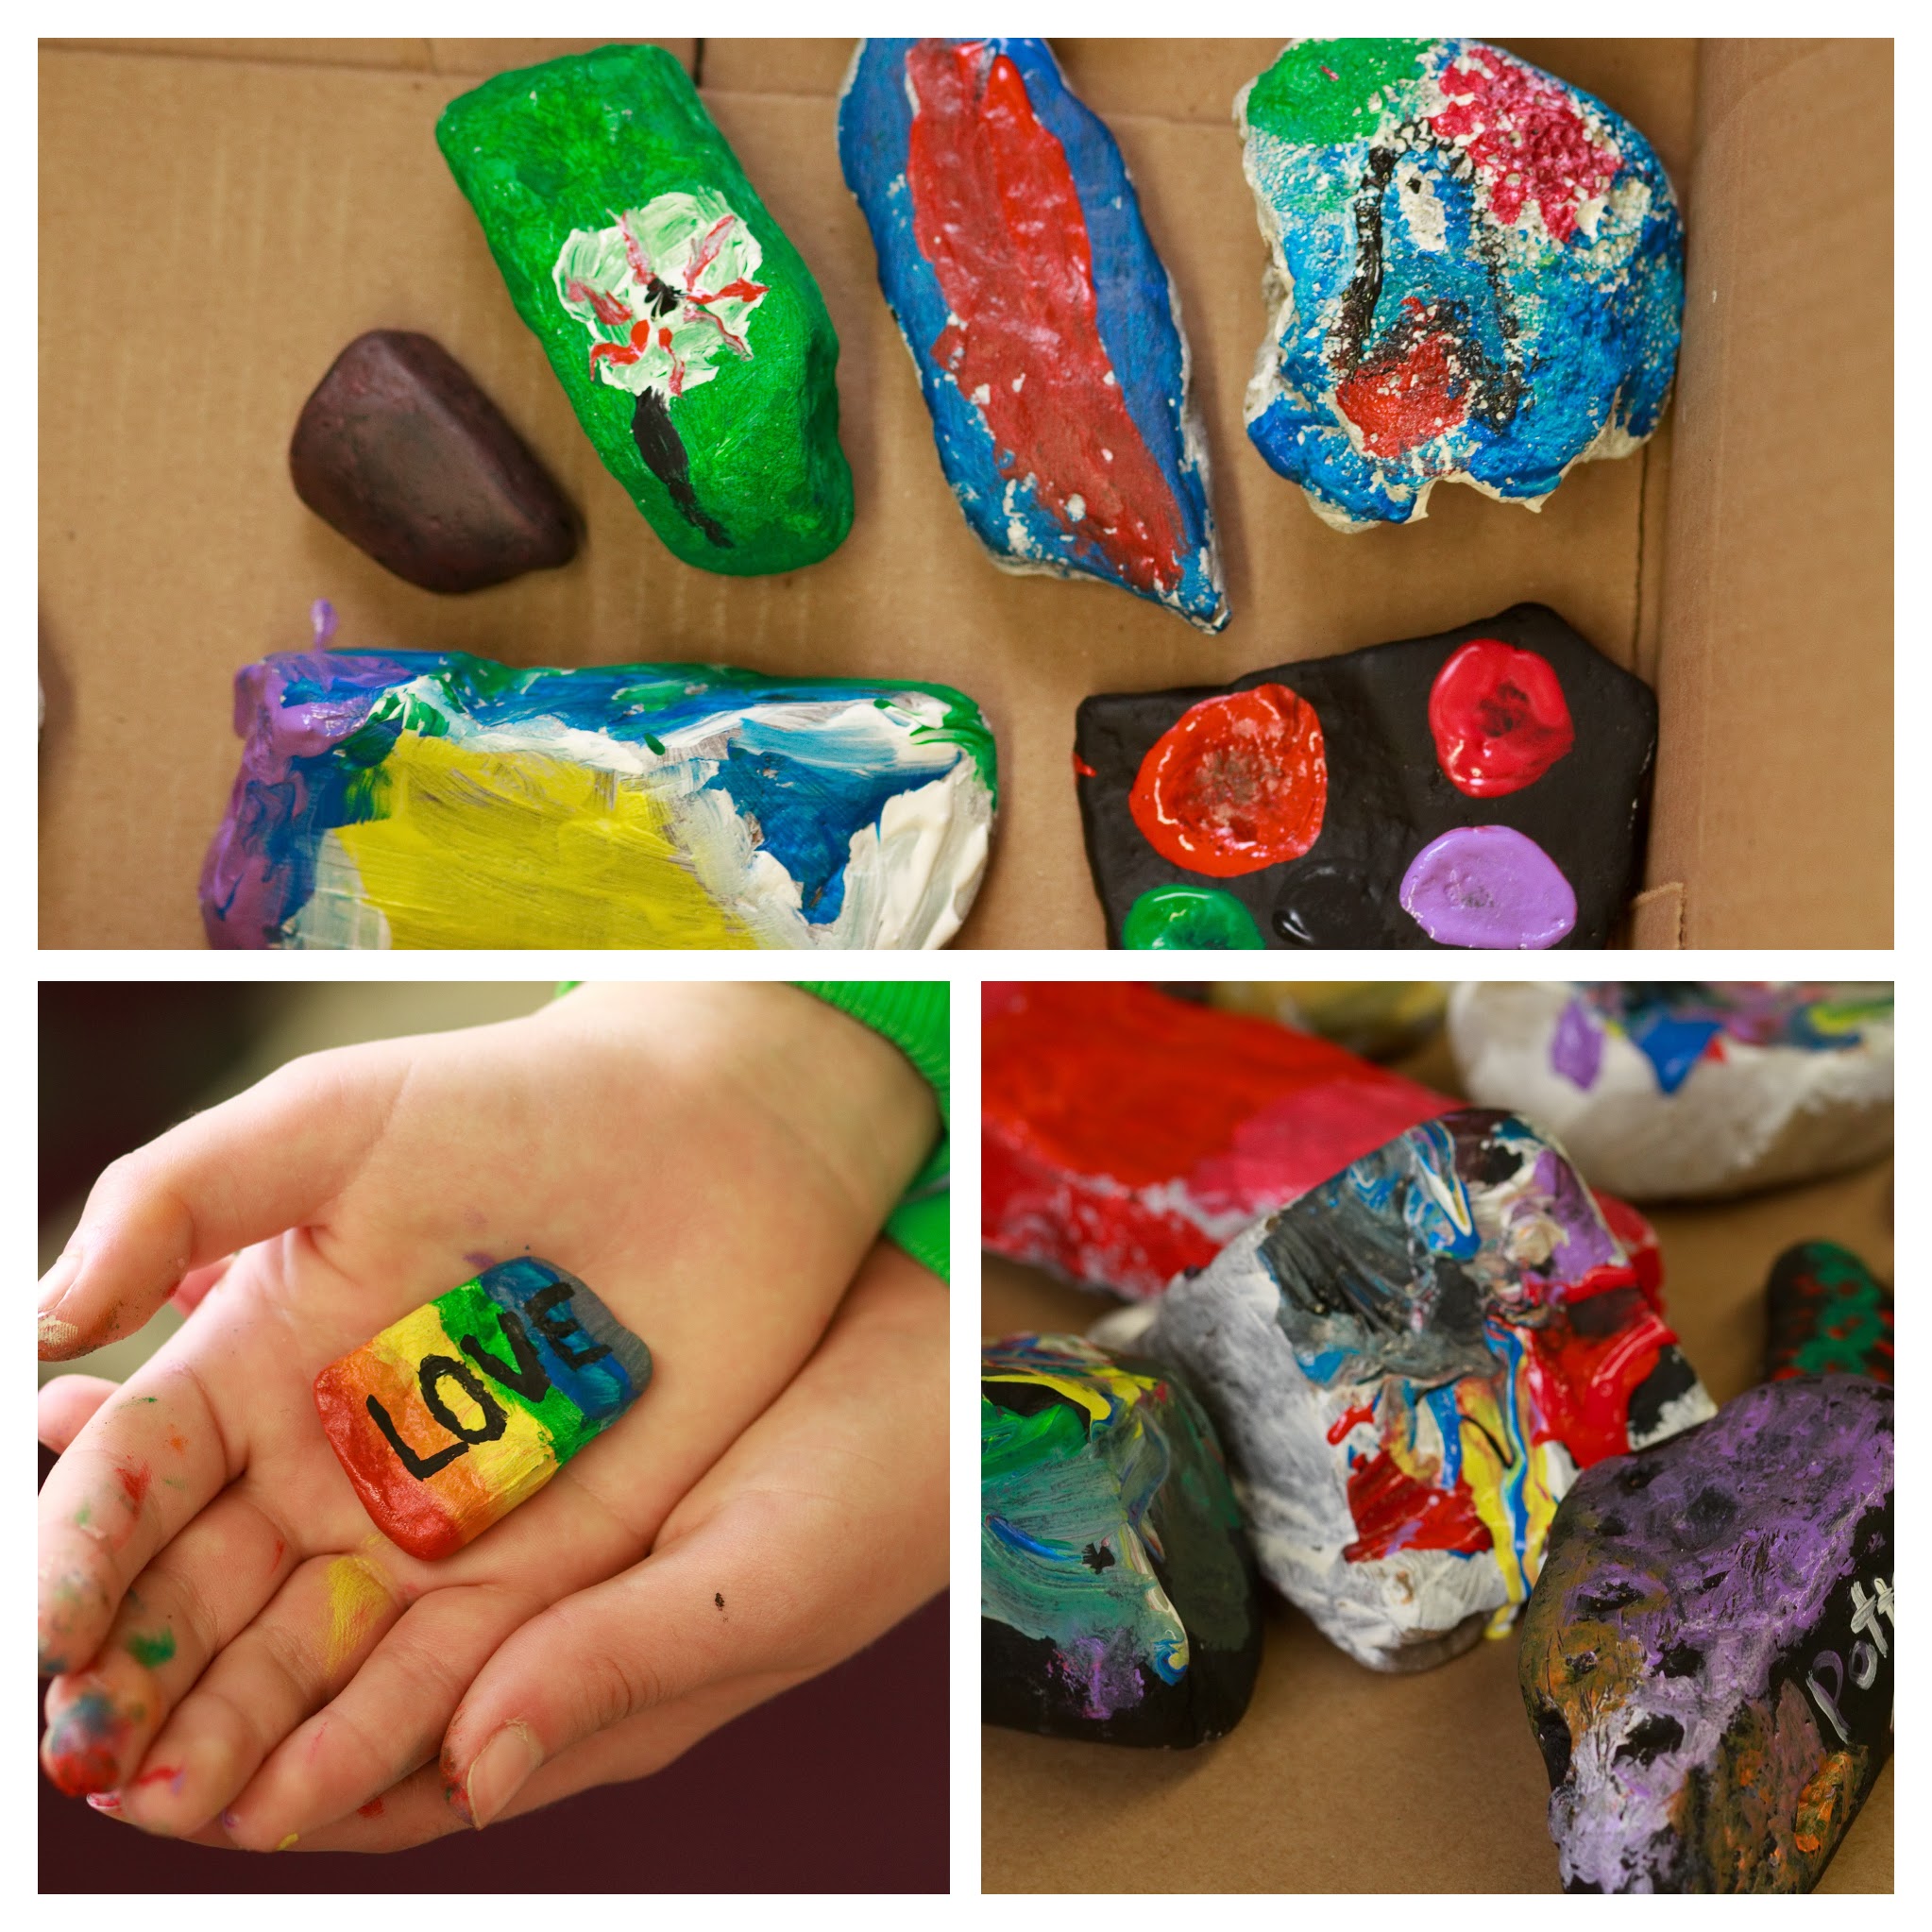 Painting Rocks at the Pottstown Library